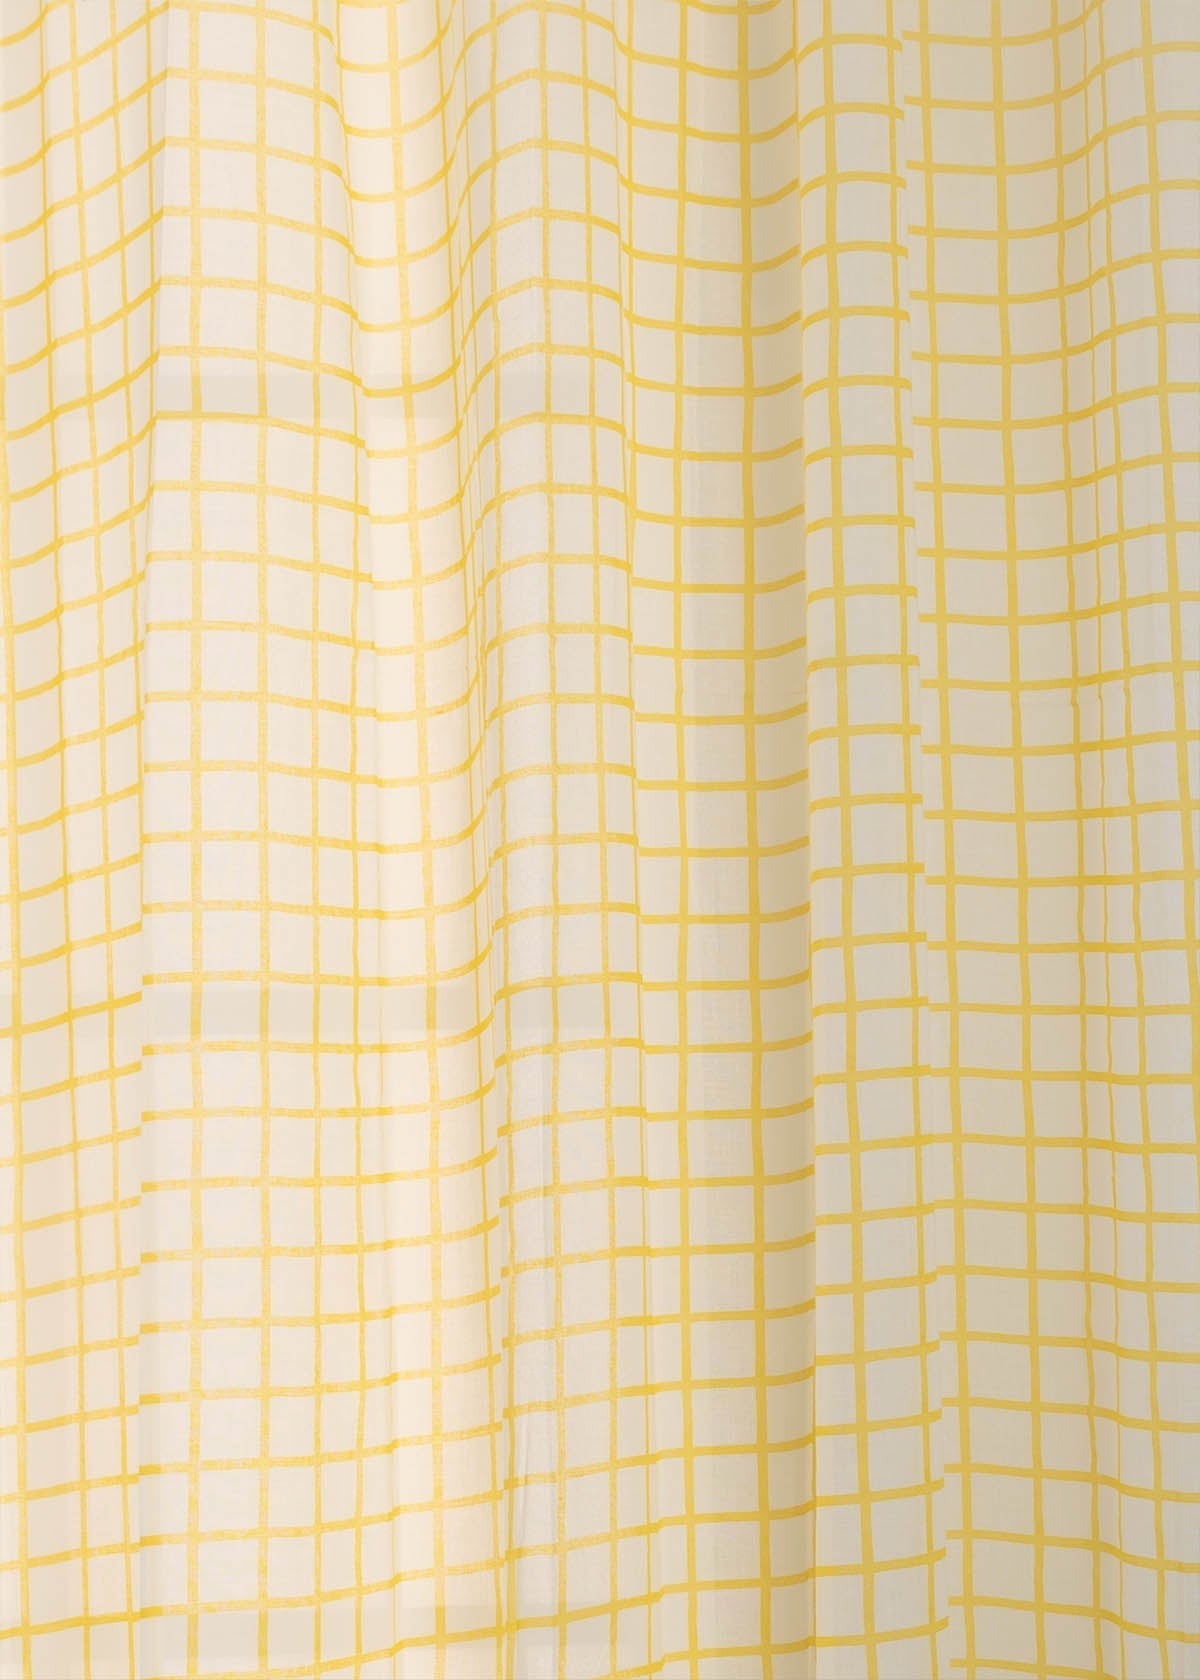 Uneven Checks Geometric 100% Cotton Sheer curtain for Living room & bedroom - Light filtering - Yellow - Pack of 1